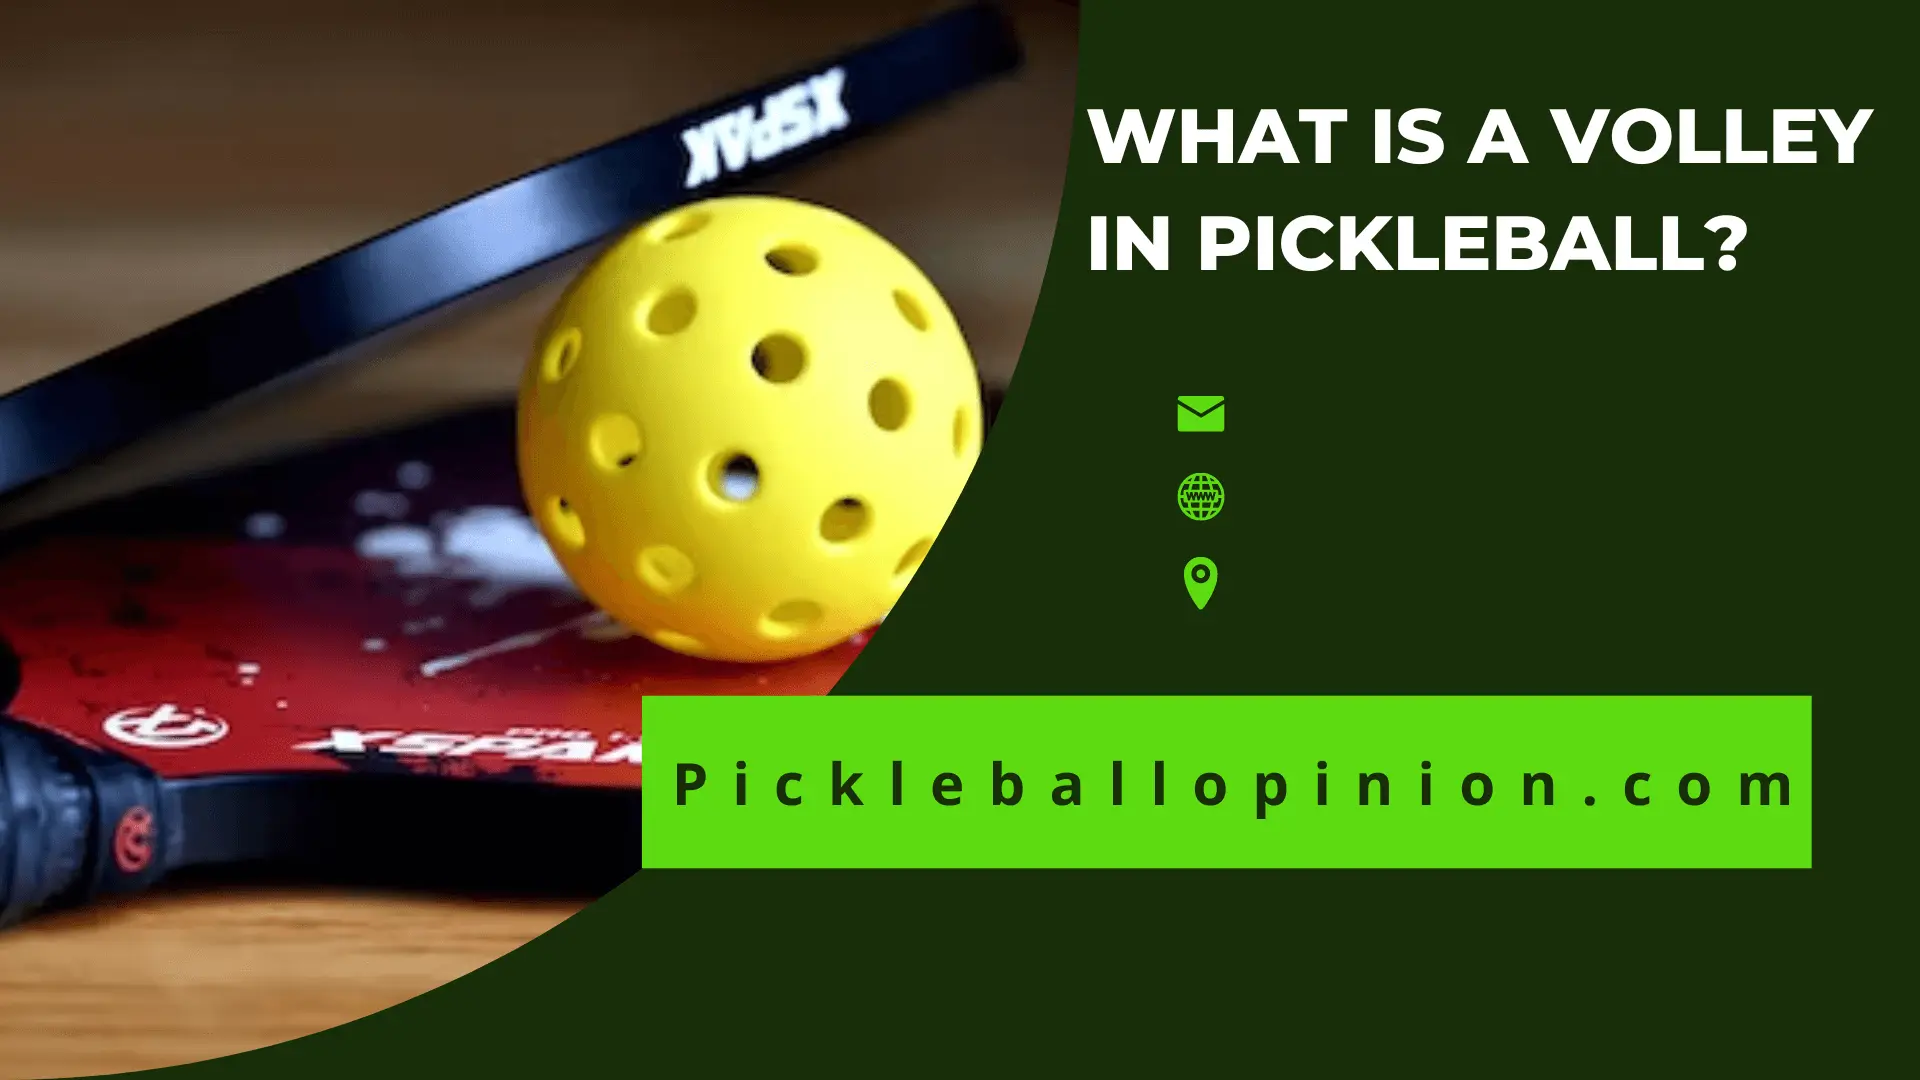 what is a volley in pickleball